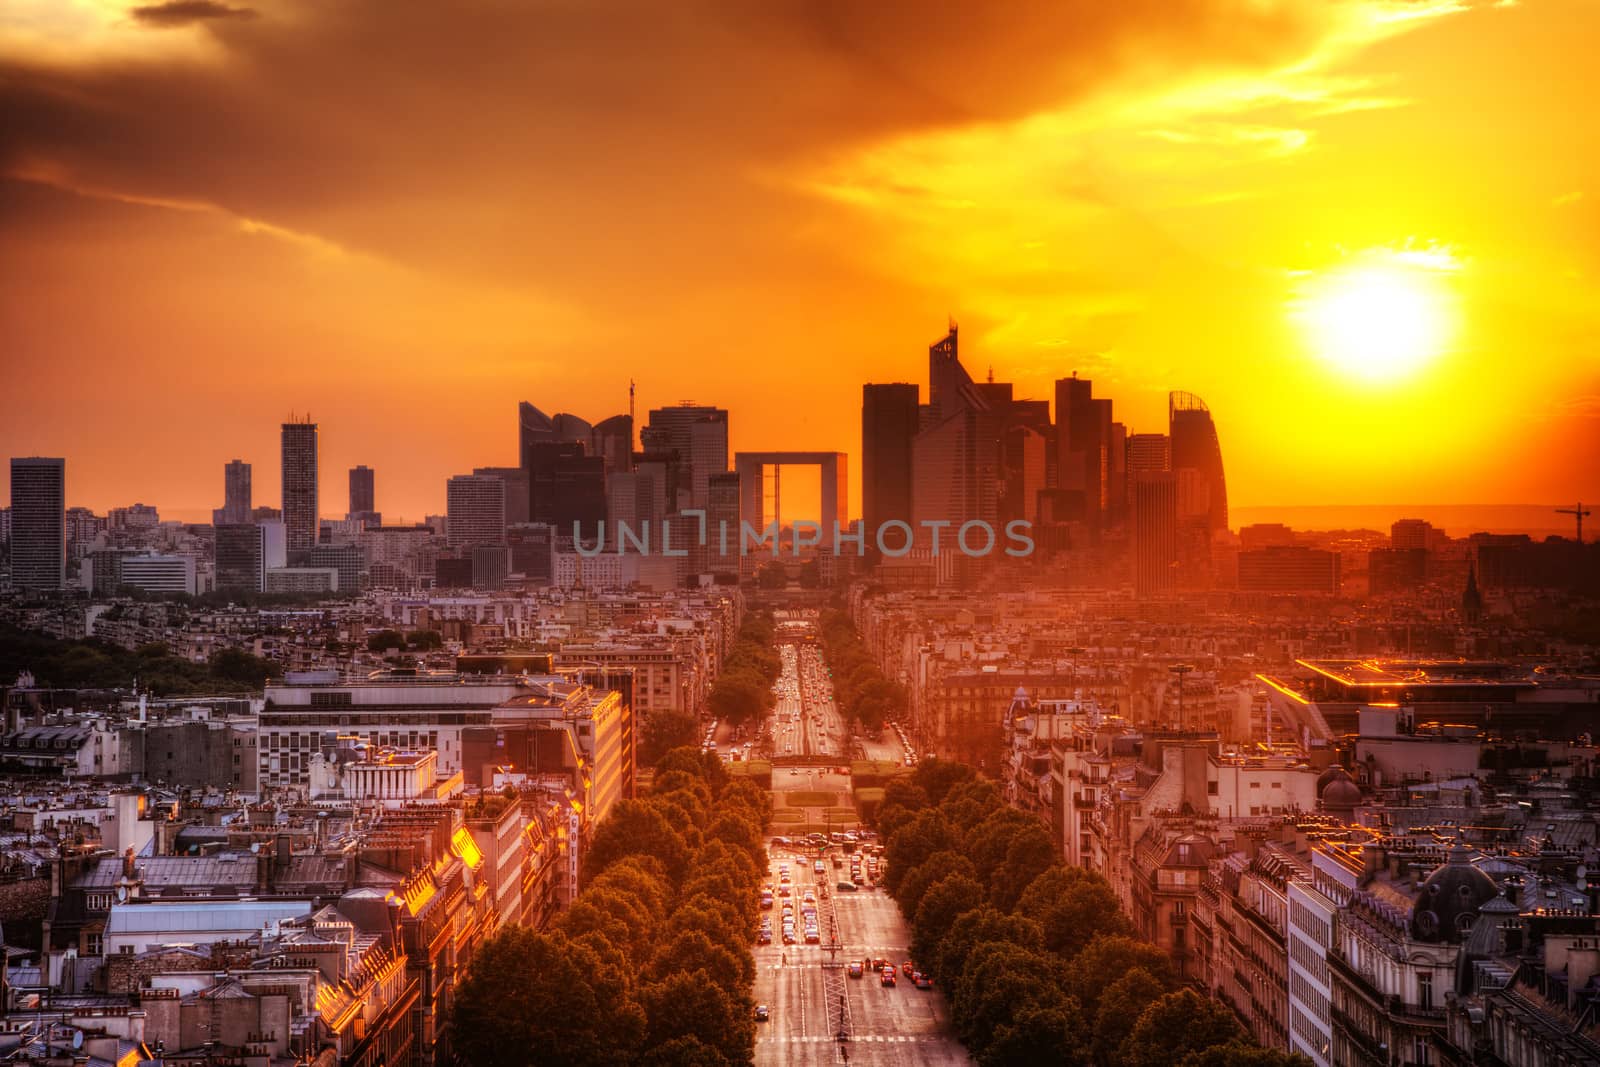 View on La Defense and Champs-Elysees at sunset in Paris, France.